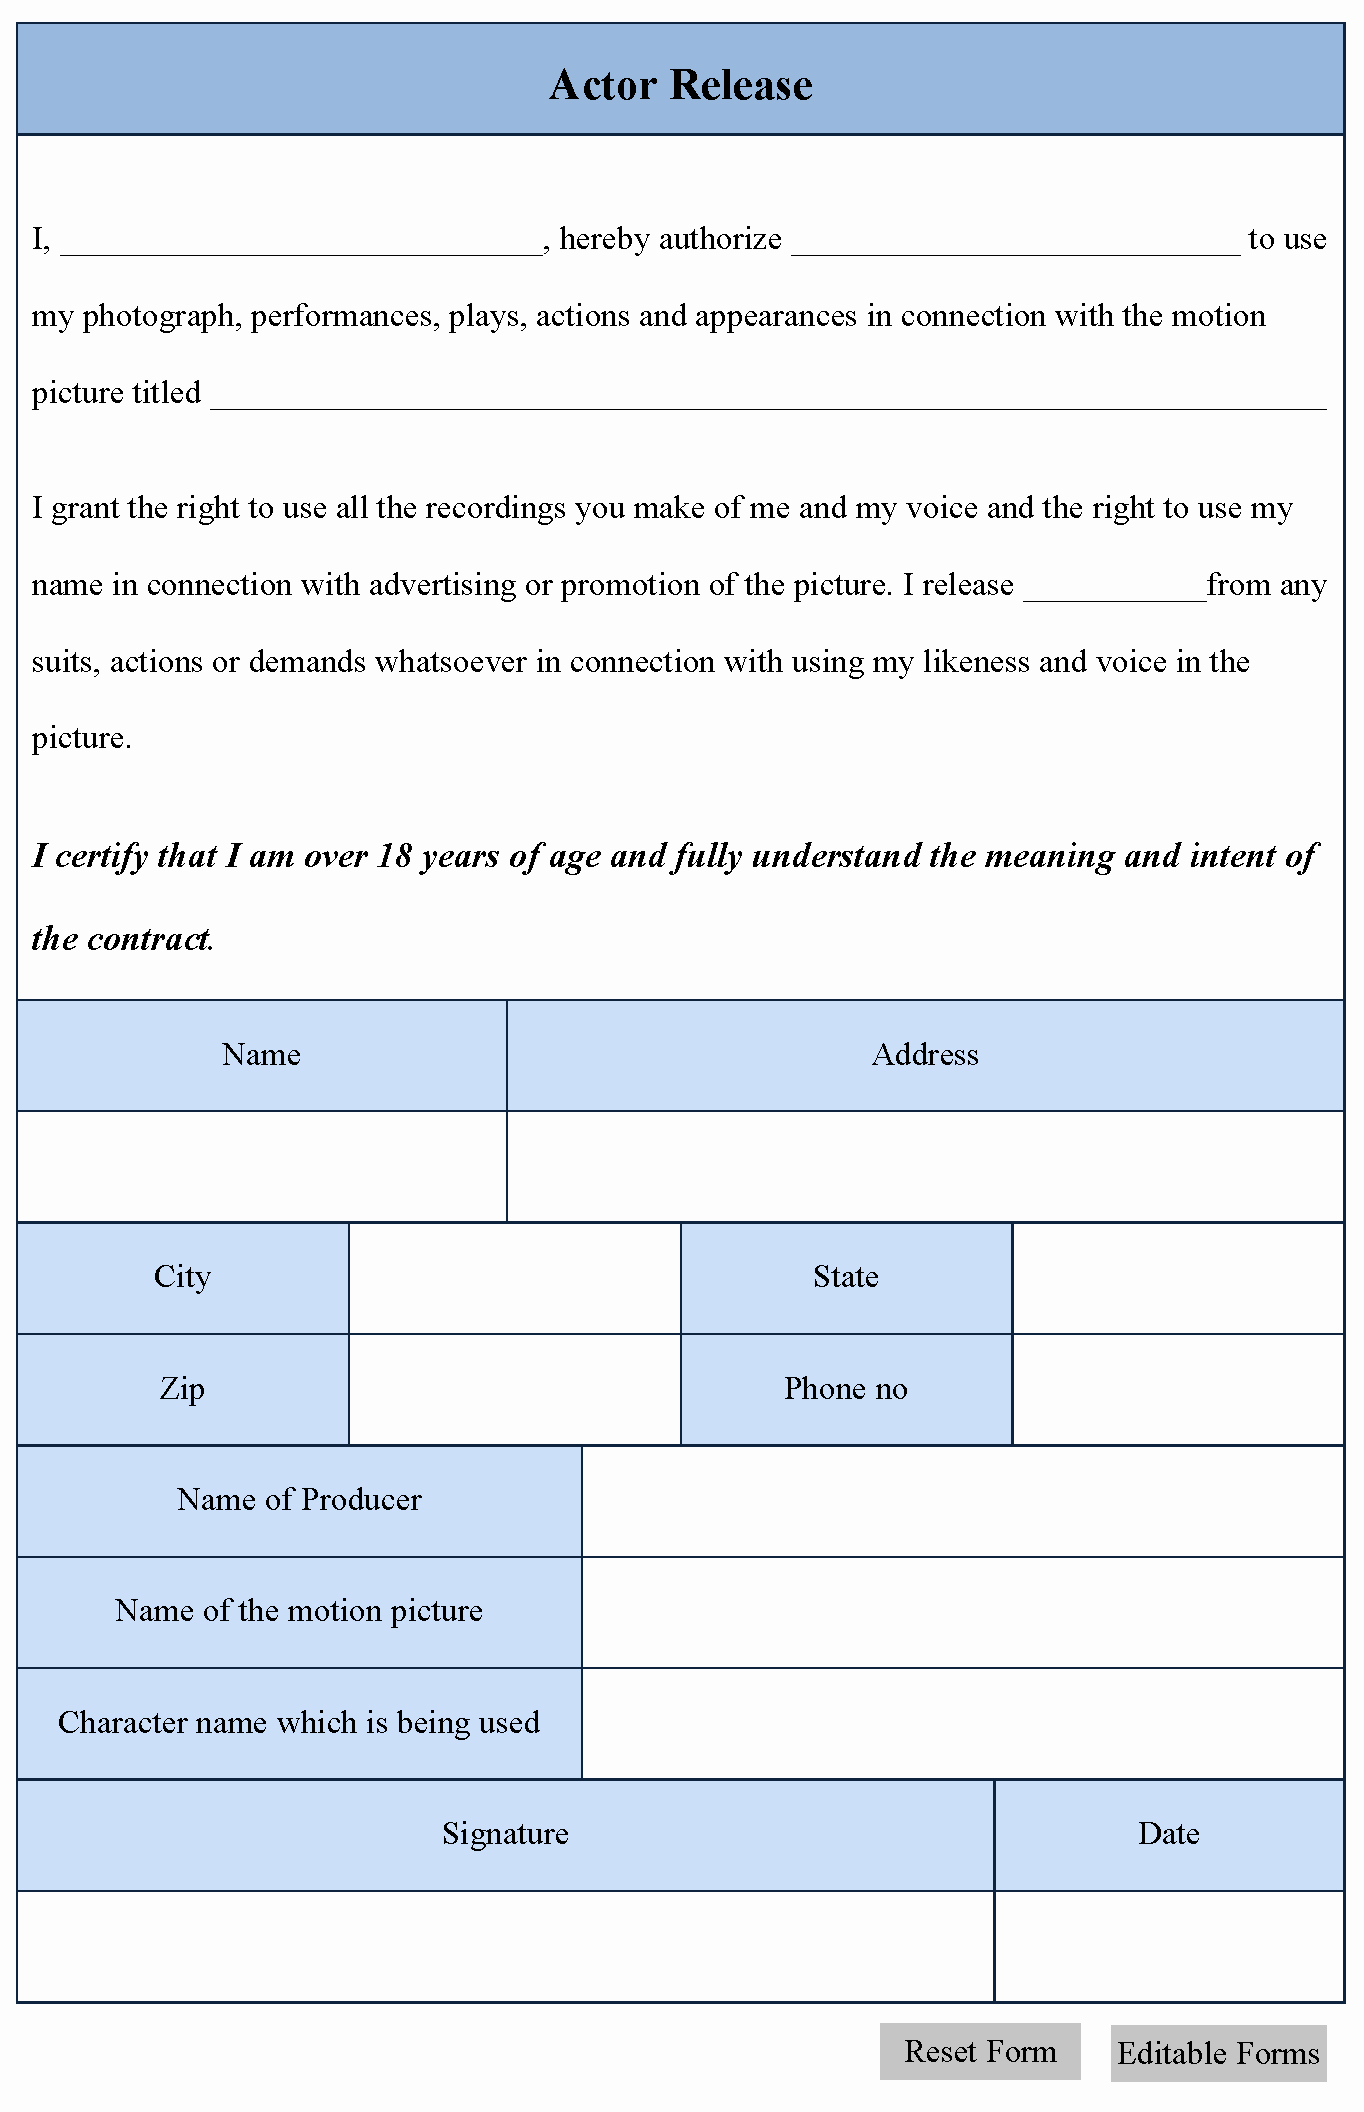 Actor Release form Template New Editable forms